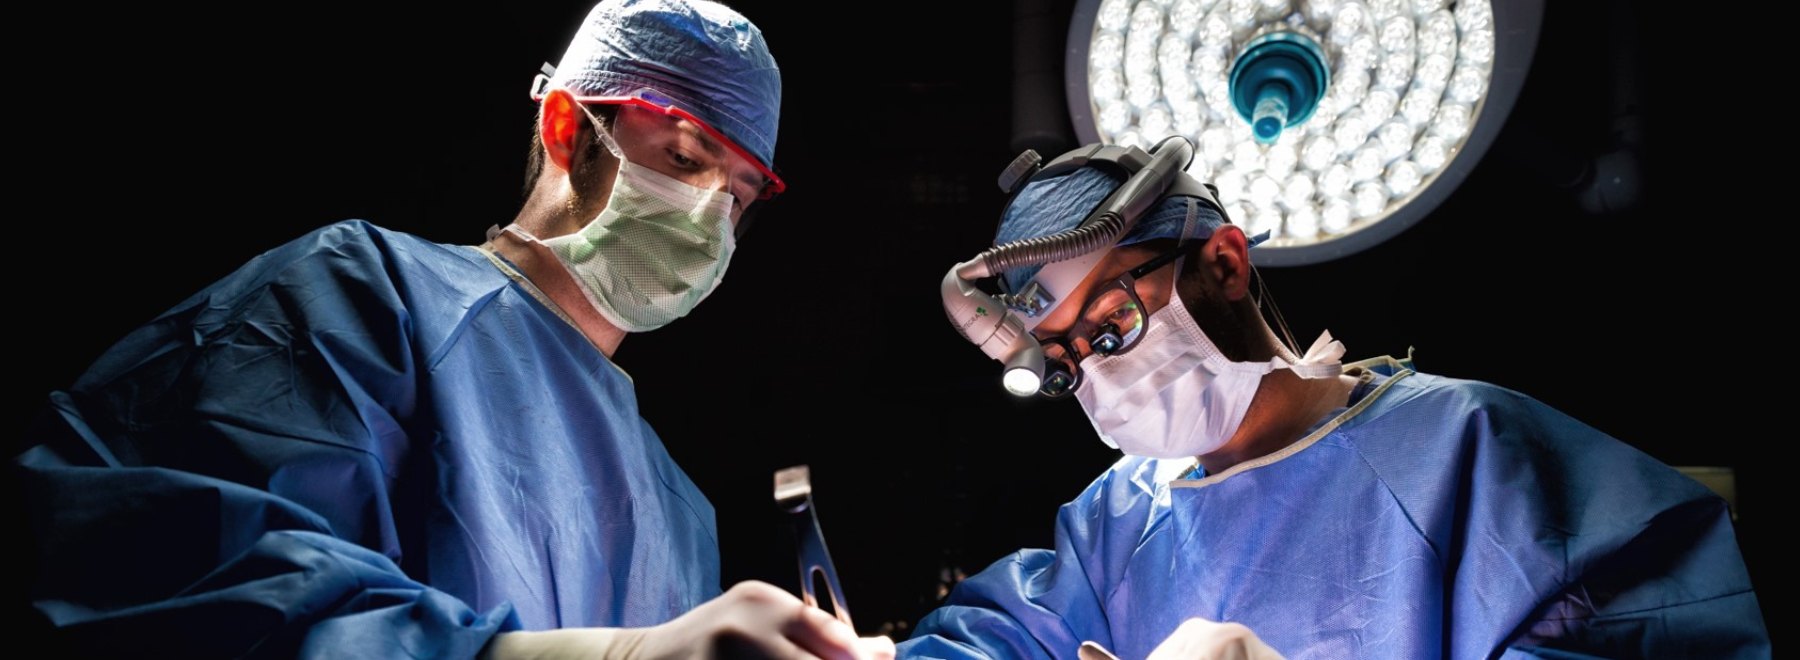 Two doctors in operating room performing surgery.